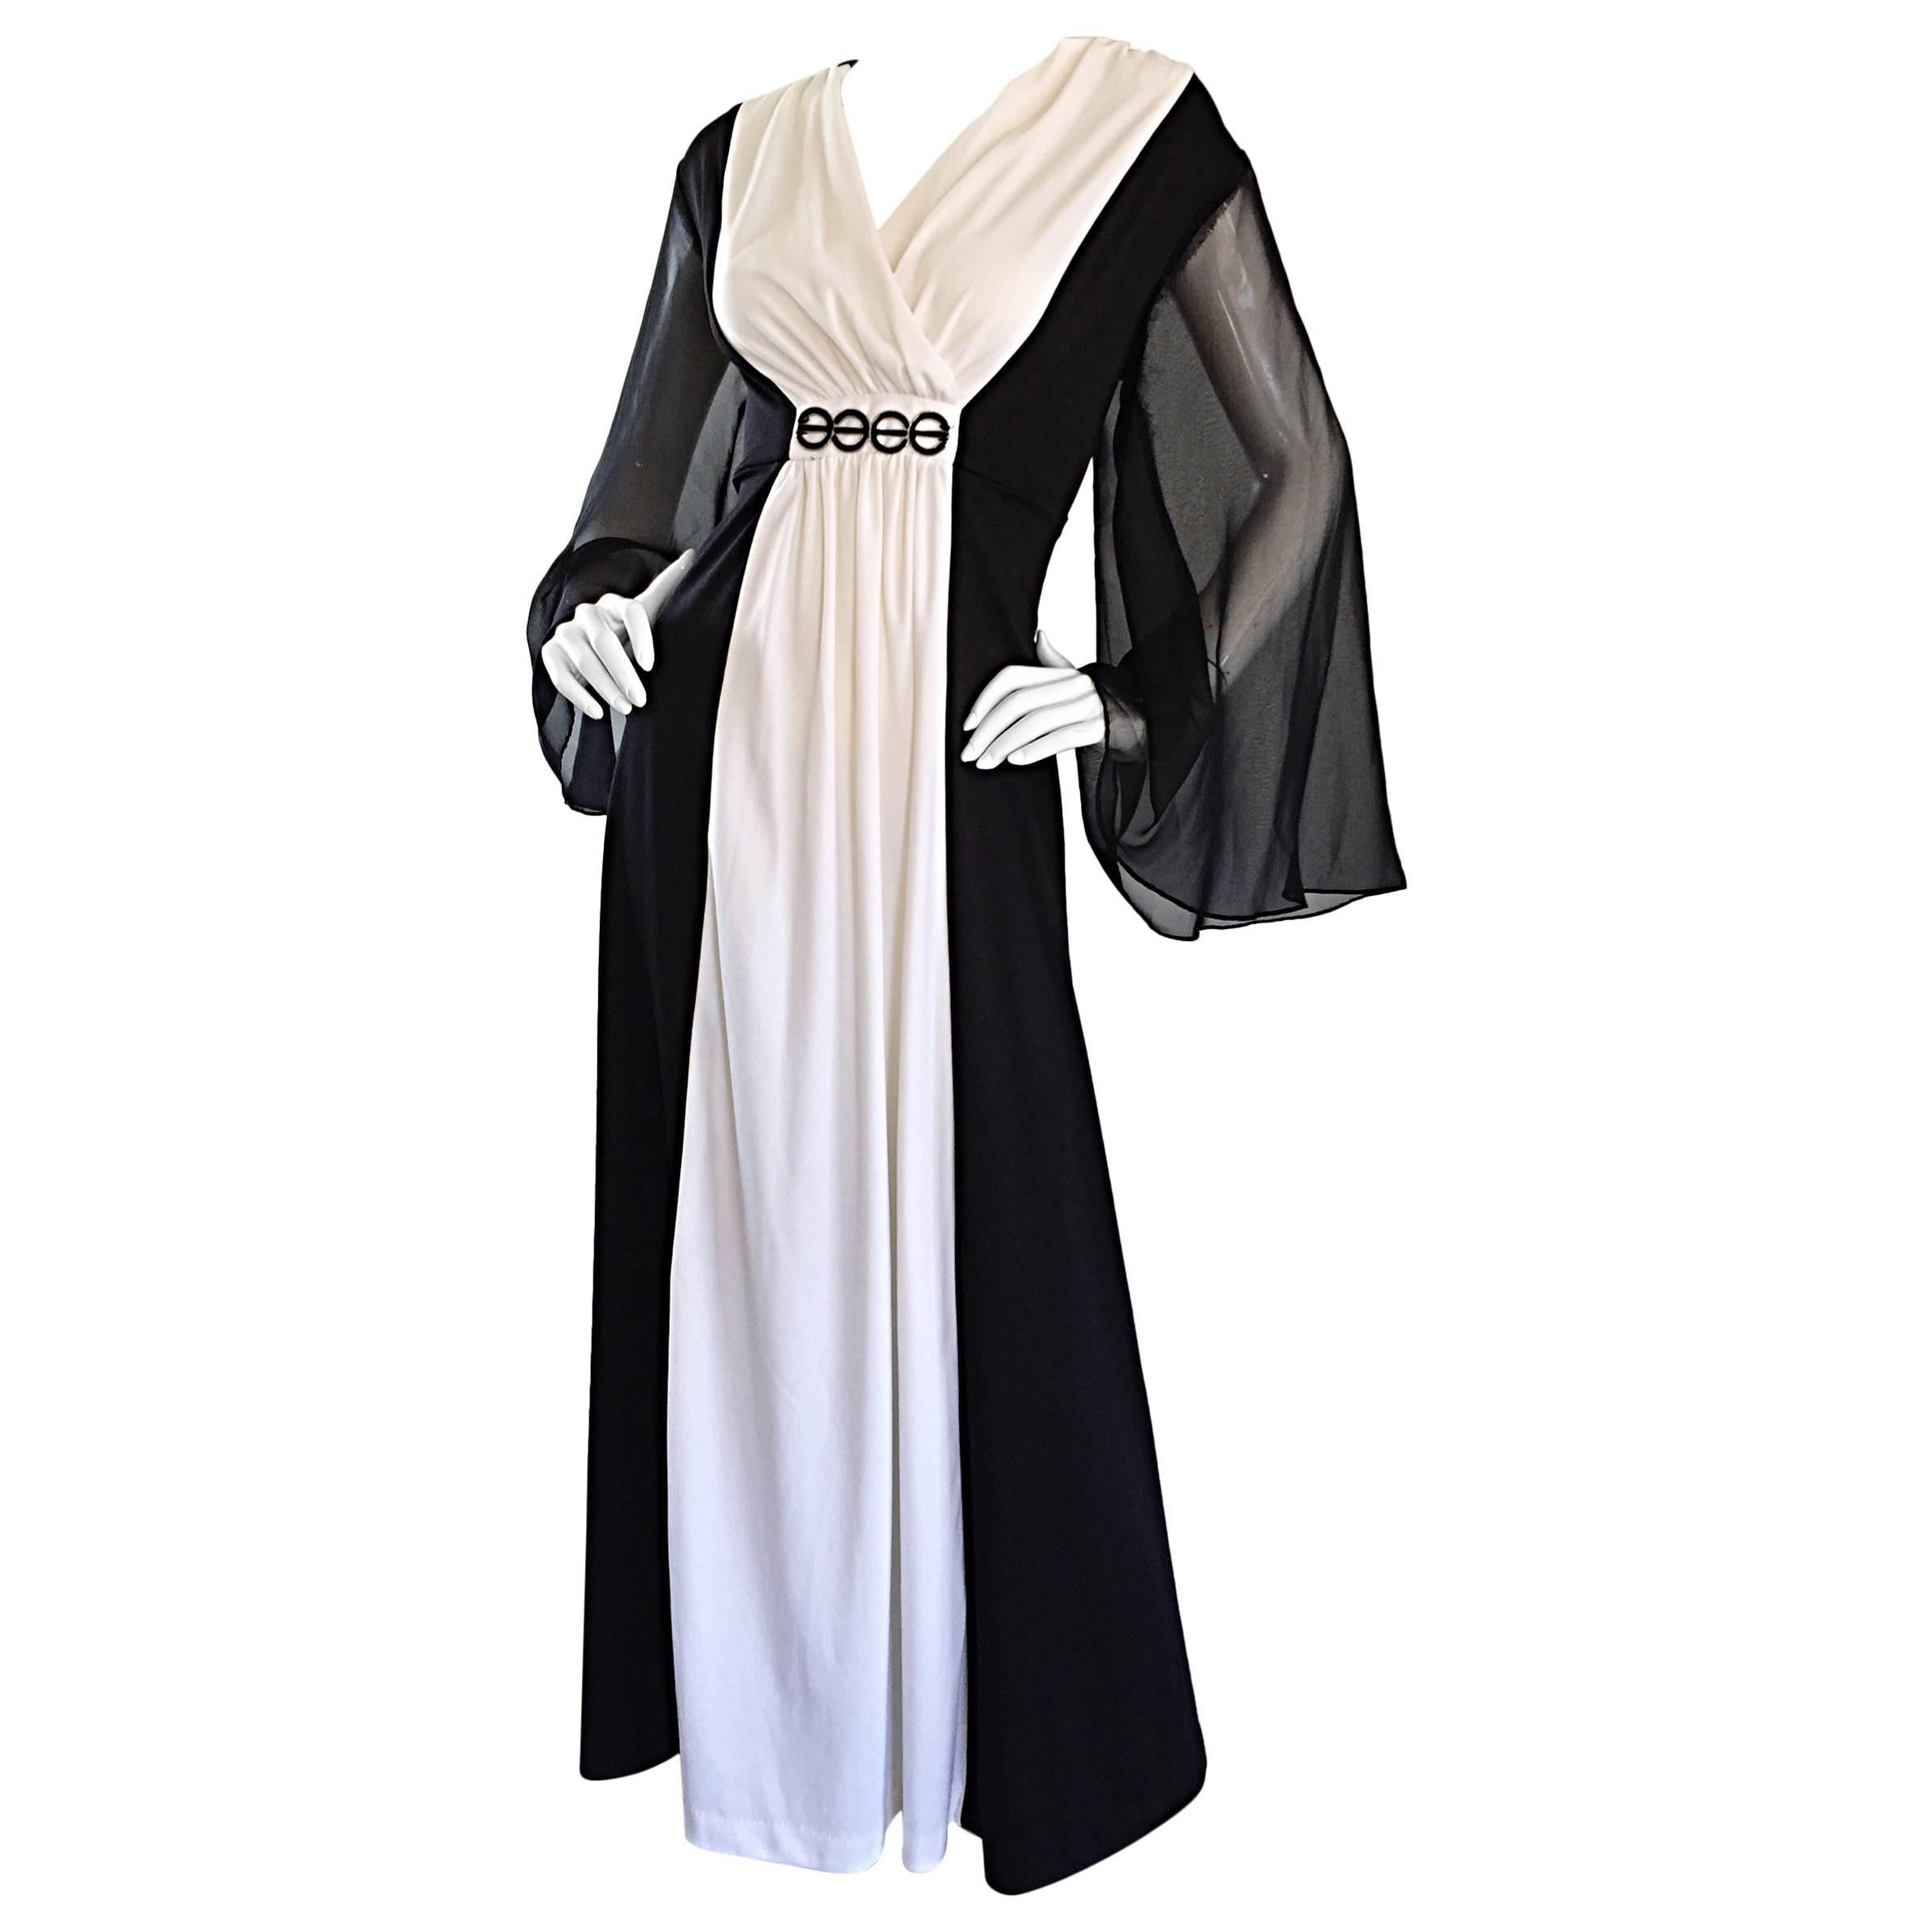 Amazing 1970s 70s Black and White Grecian Maxi Dress / Gown w/ Angel Sleeves